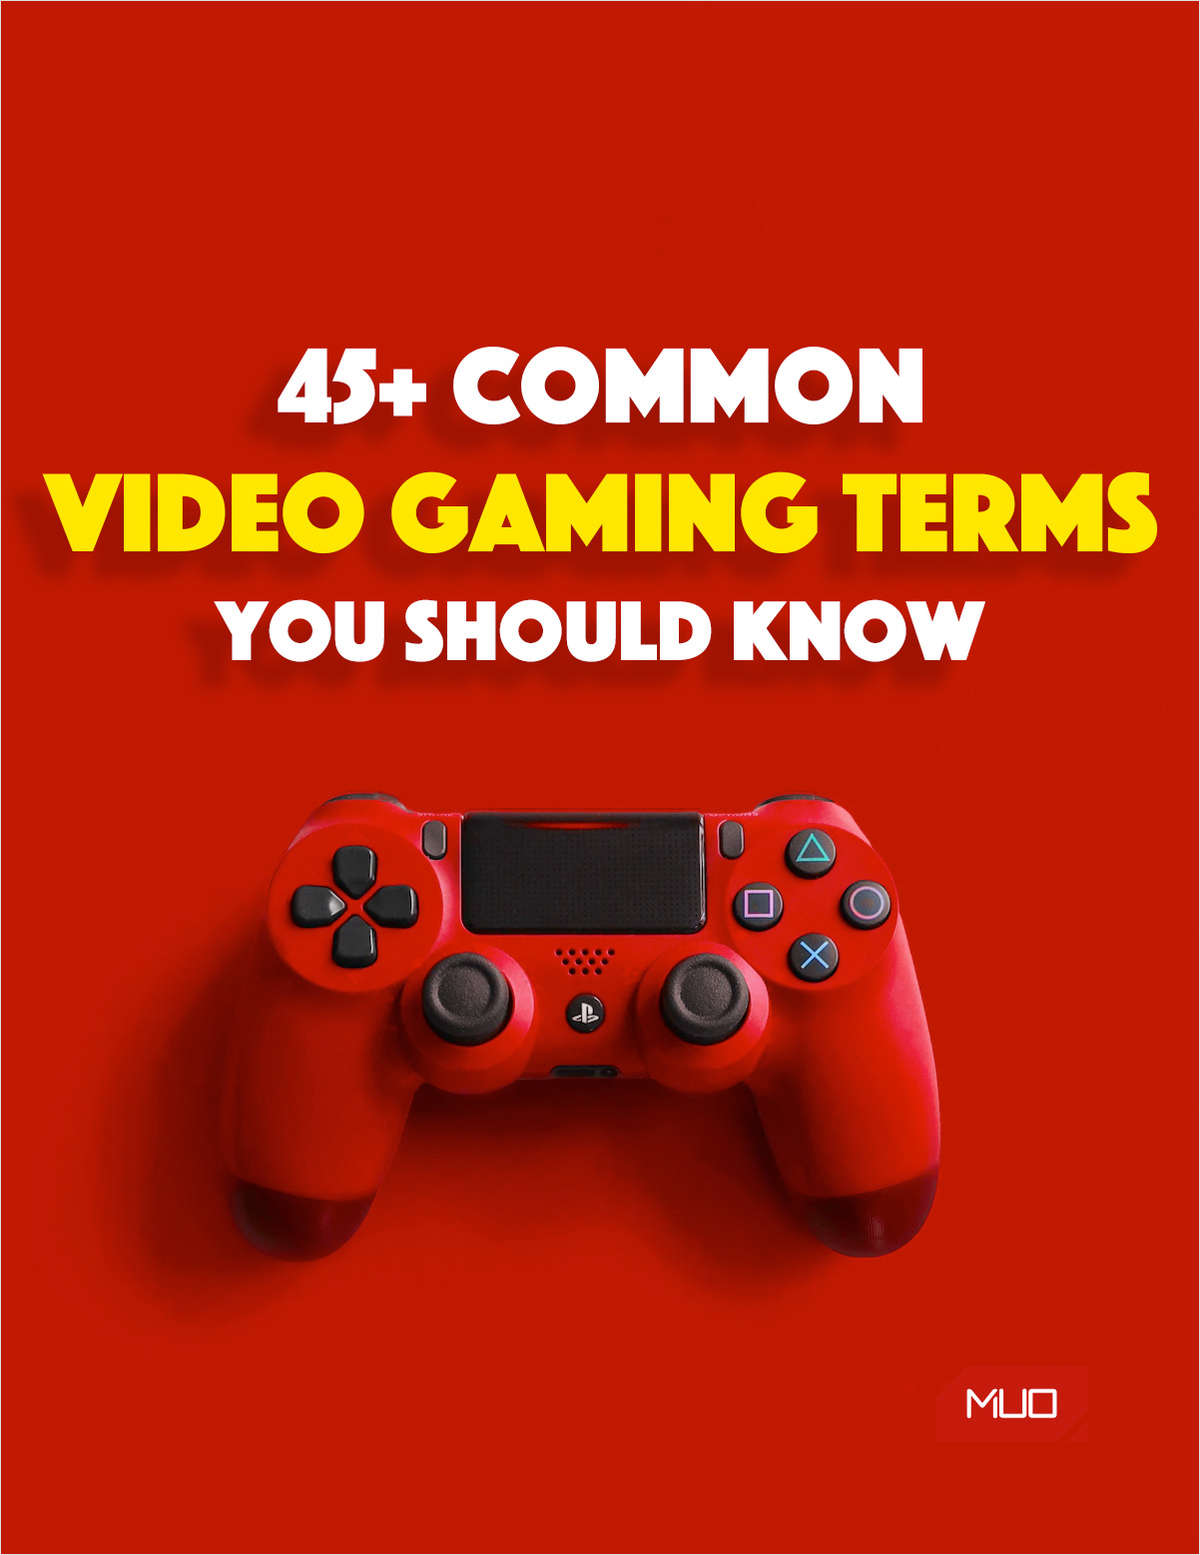 45+ Common Video Gaming Terms You Should Know